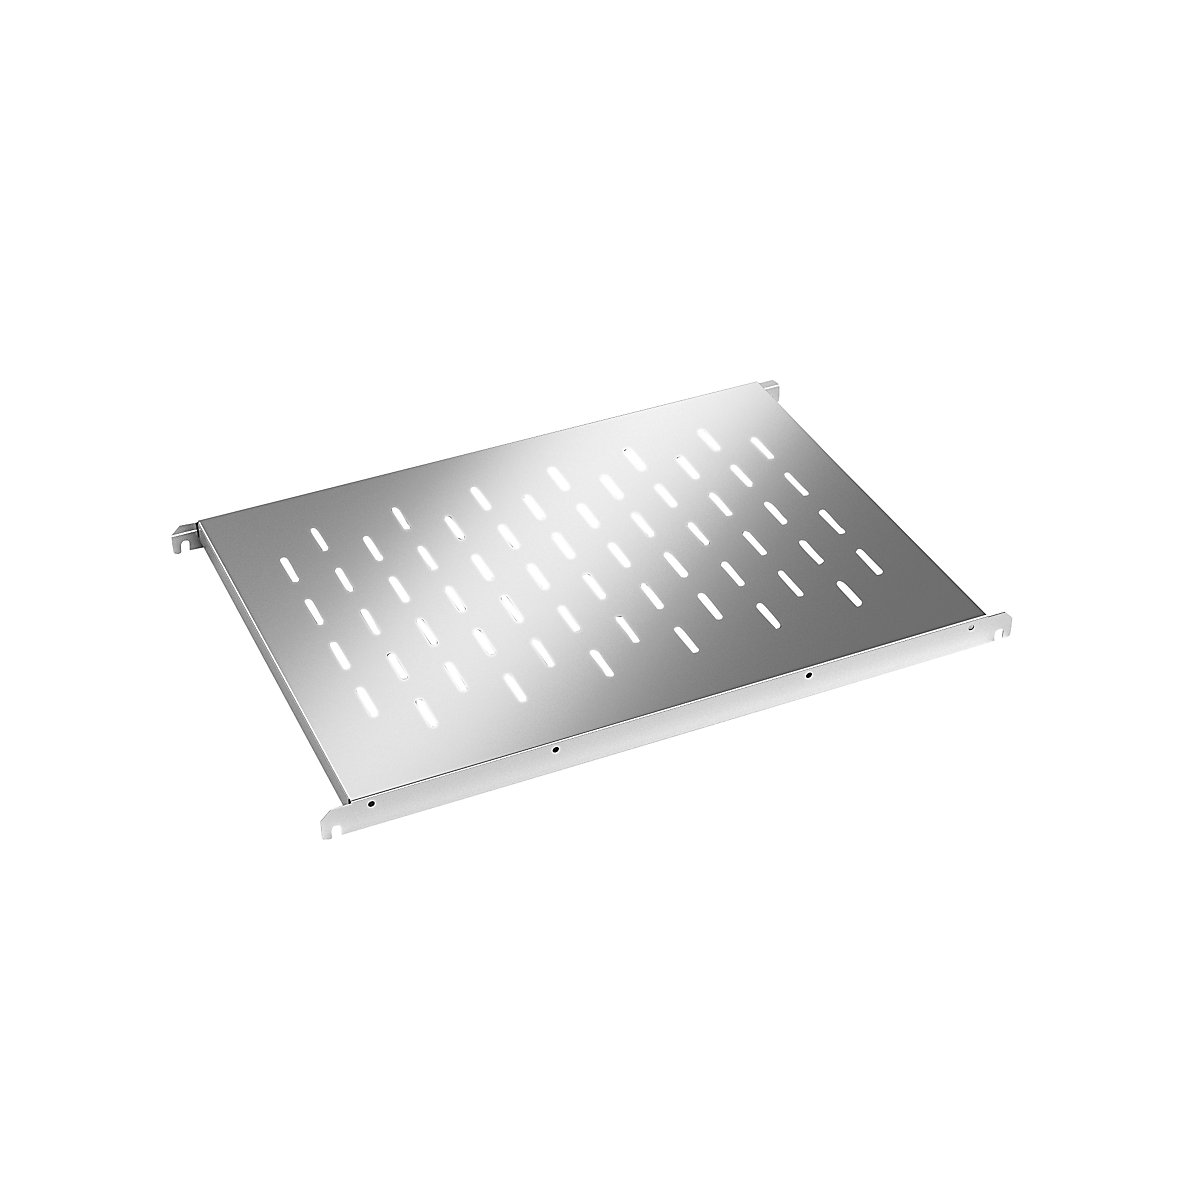 Stainless steel shelf, perforated, WxD 740 x 540 mm